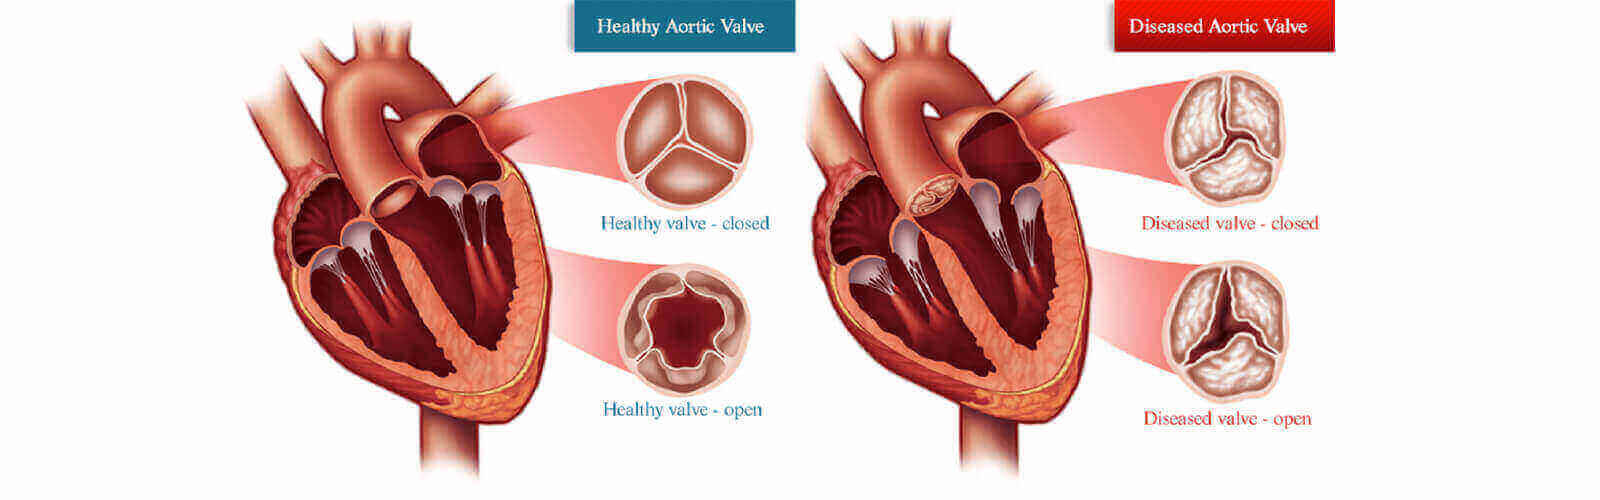 Heart Valve Replacement Surgery in Sunderland